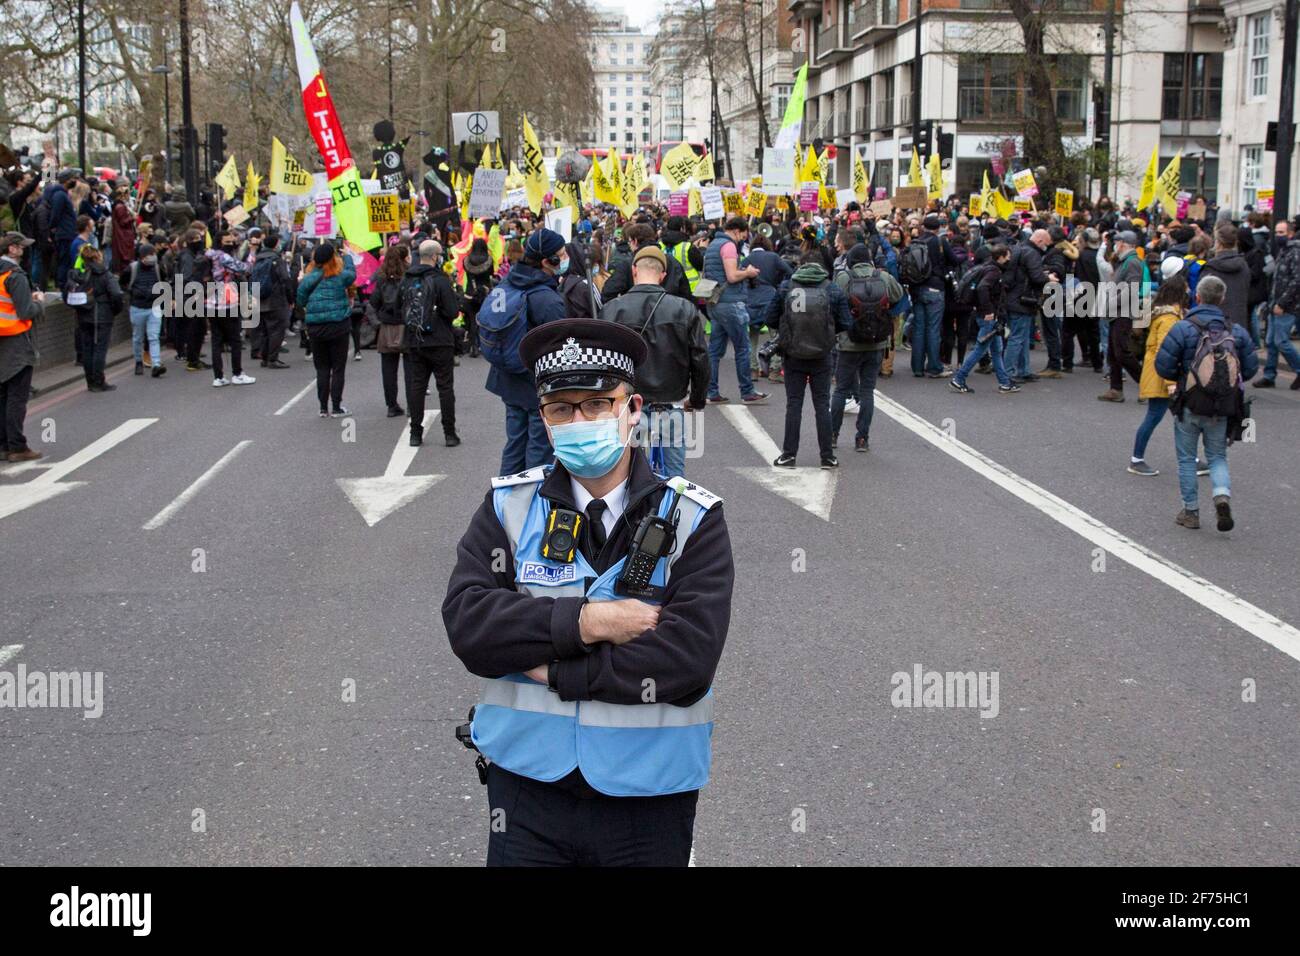 Police and Crime Bill Protest in Central London, turns to violence between protestors and Police on April 3rd 2021 Stock Photo